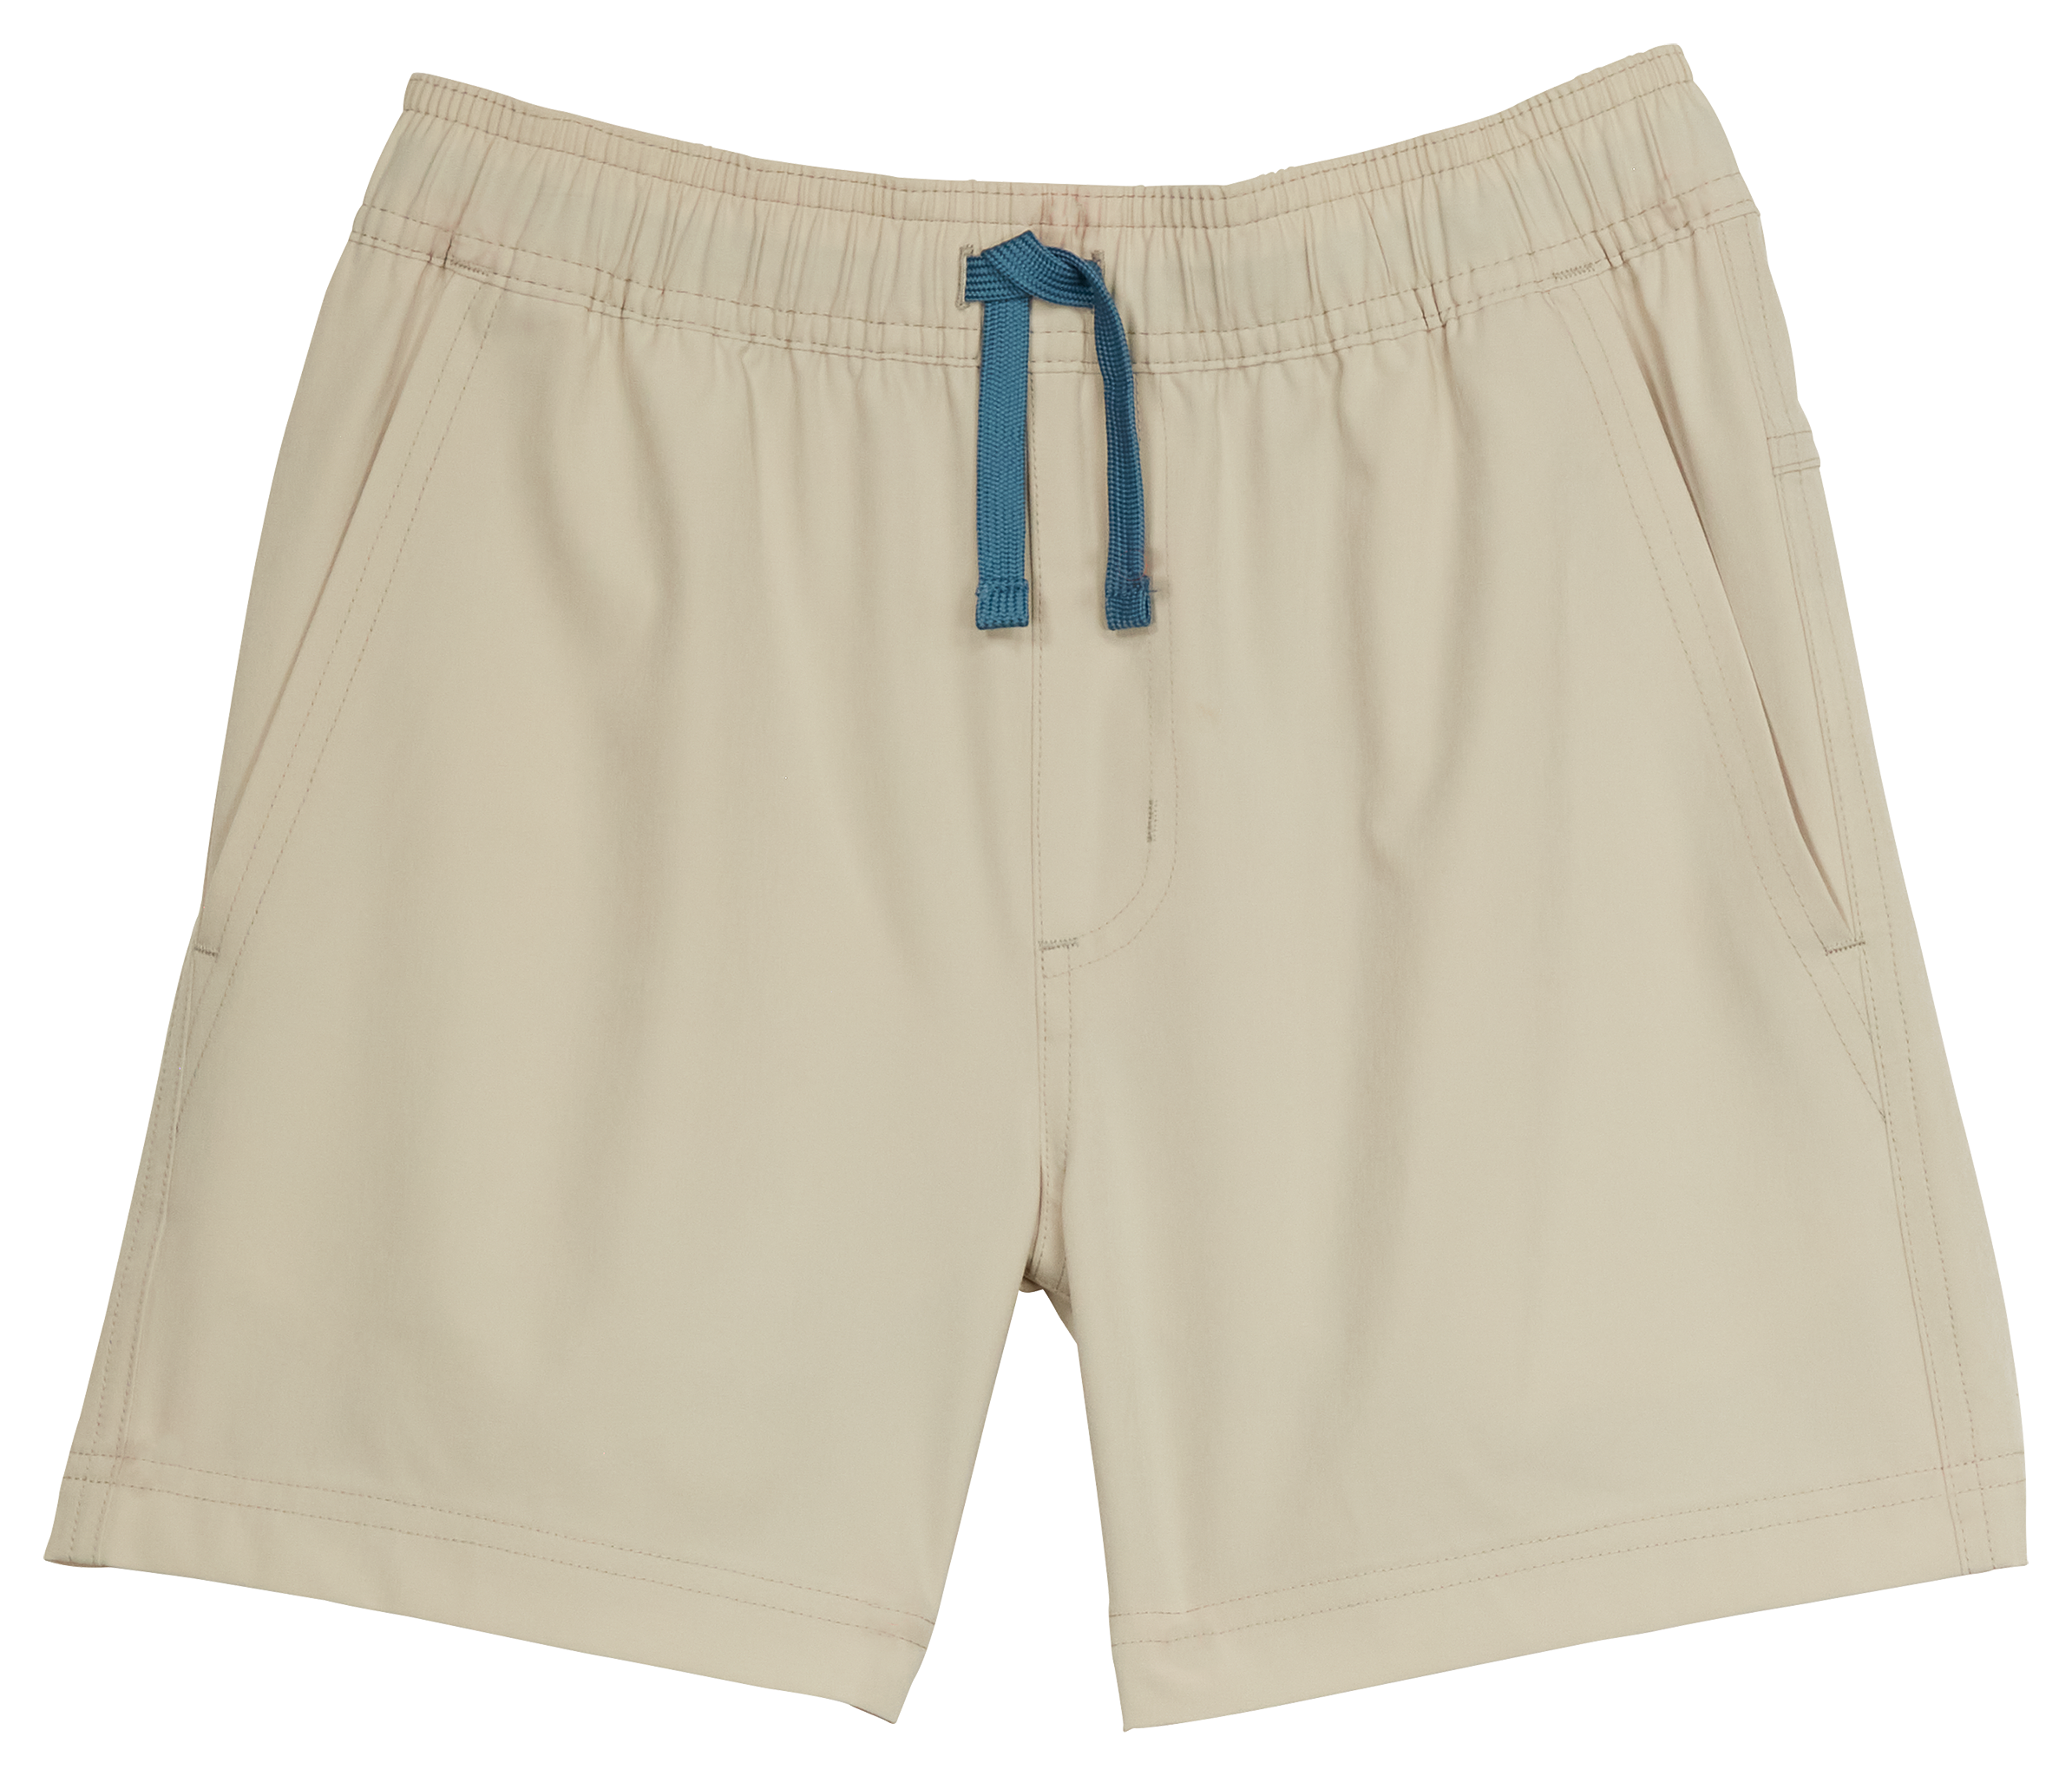 World Wide Sportsman Charter 3-Pocket Pull-On Shorts for Toddlers - Peyote - 3T